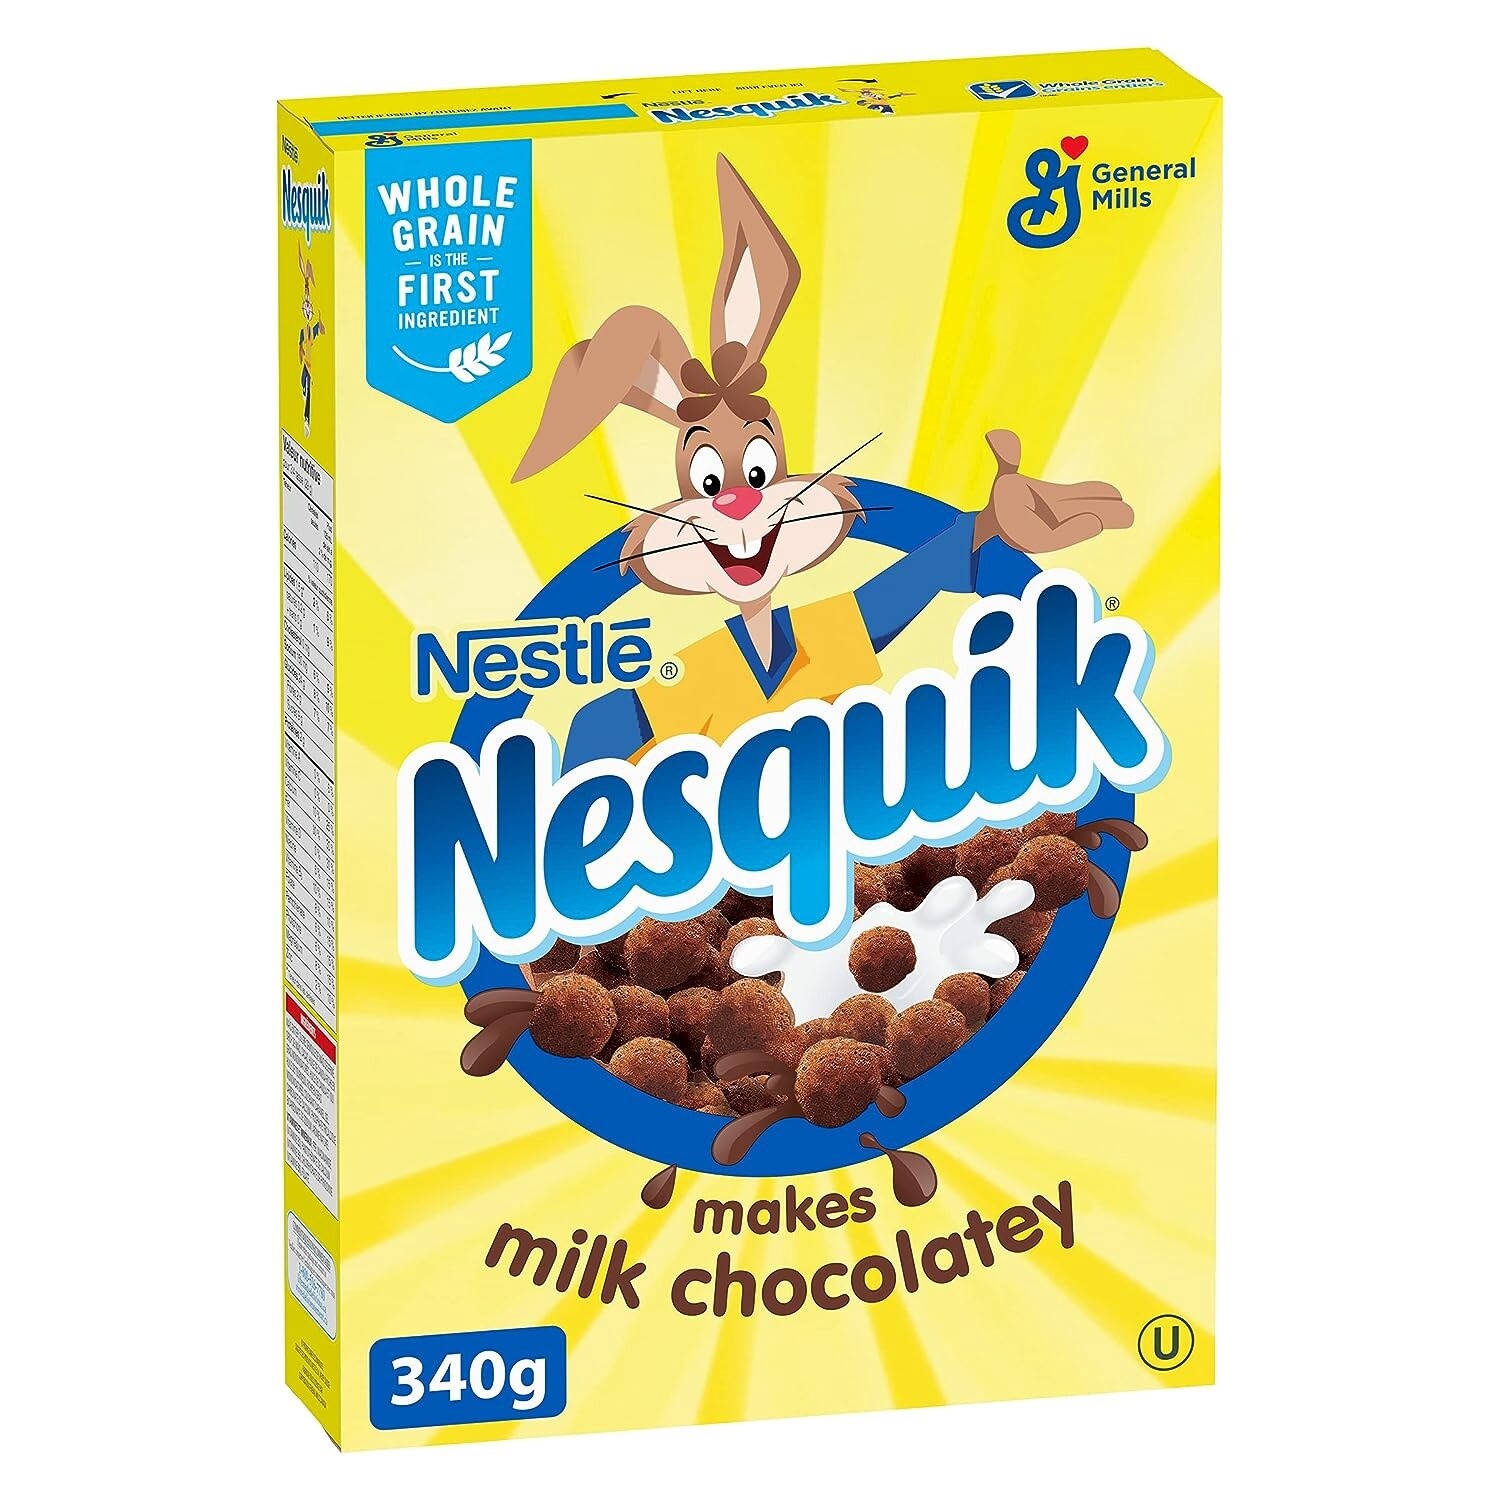 REDUCED BB - Nesquik Cereal 340g